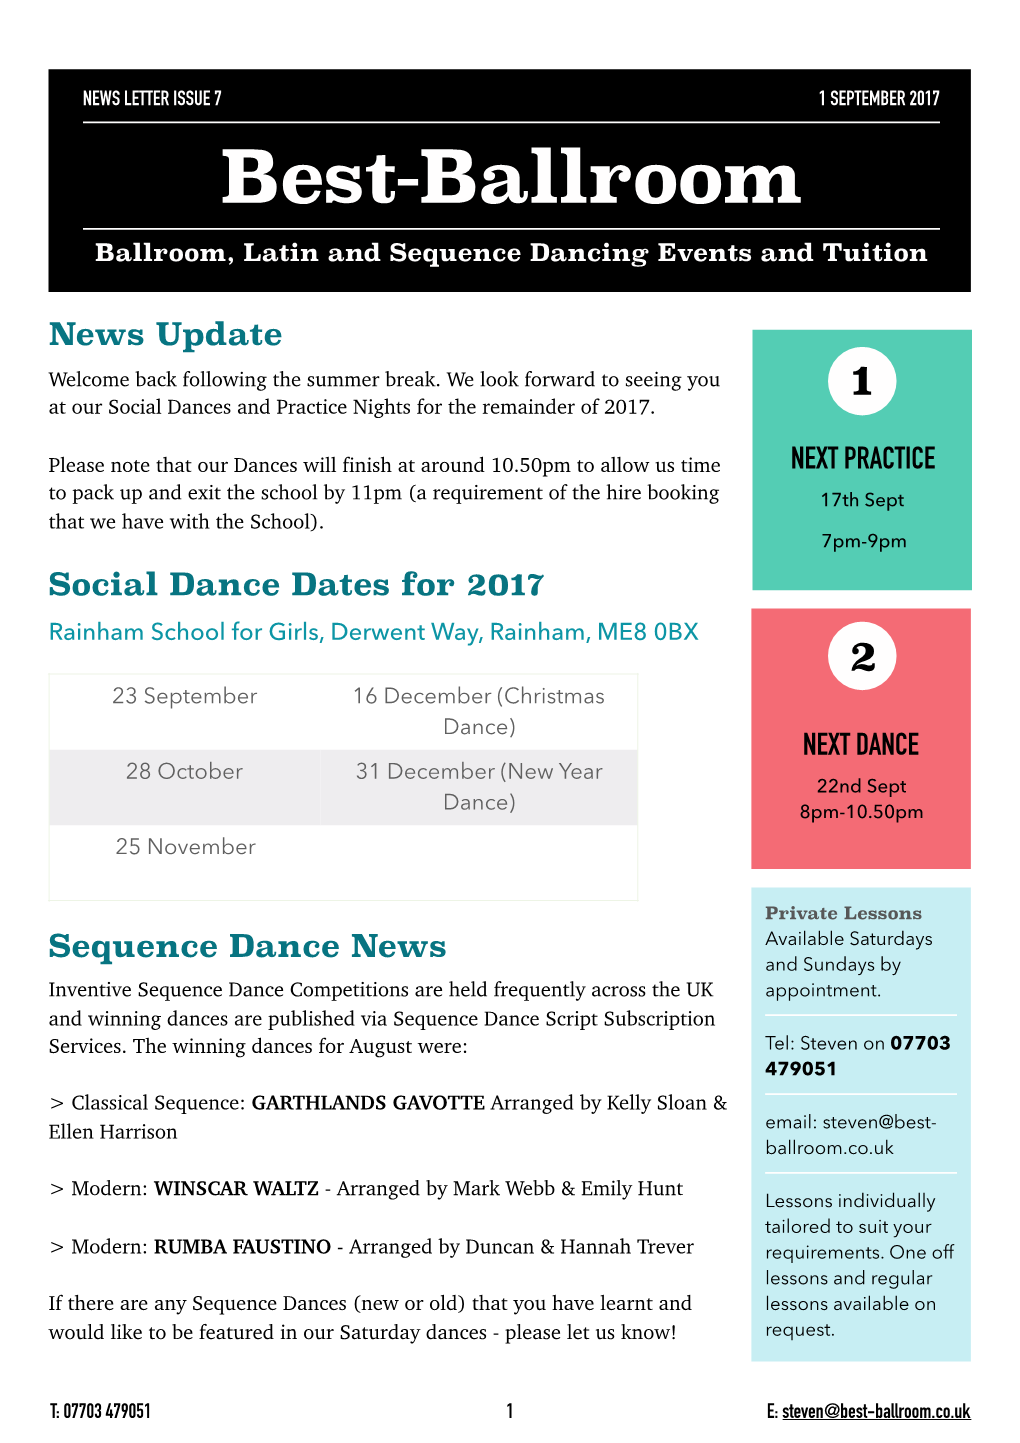 Sequence Dance News Available Saturdays and Sundays by Inventive Sequence Dance Competitions Are Held Frequently Across the UK Appointment